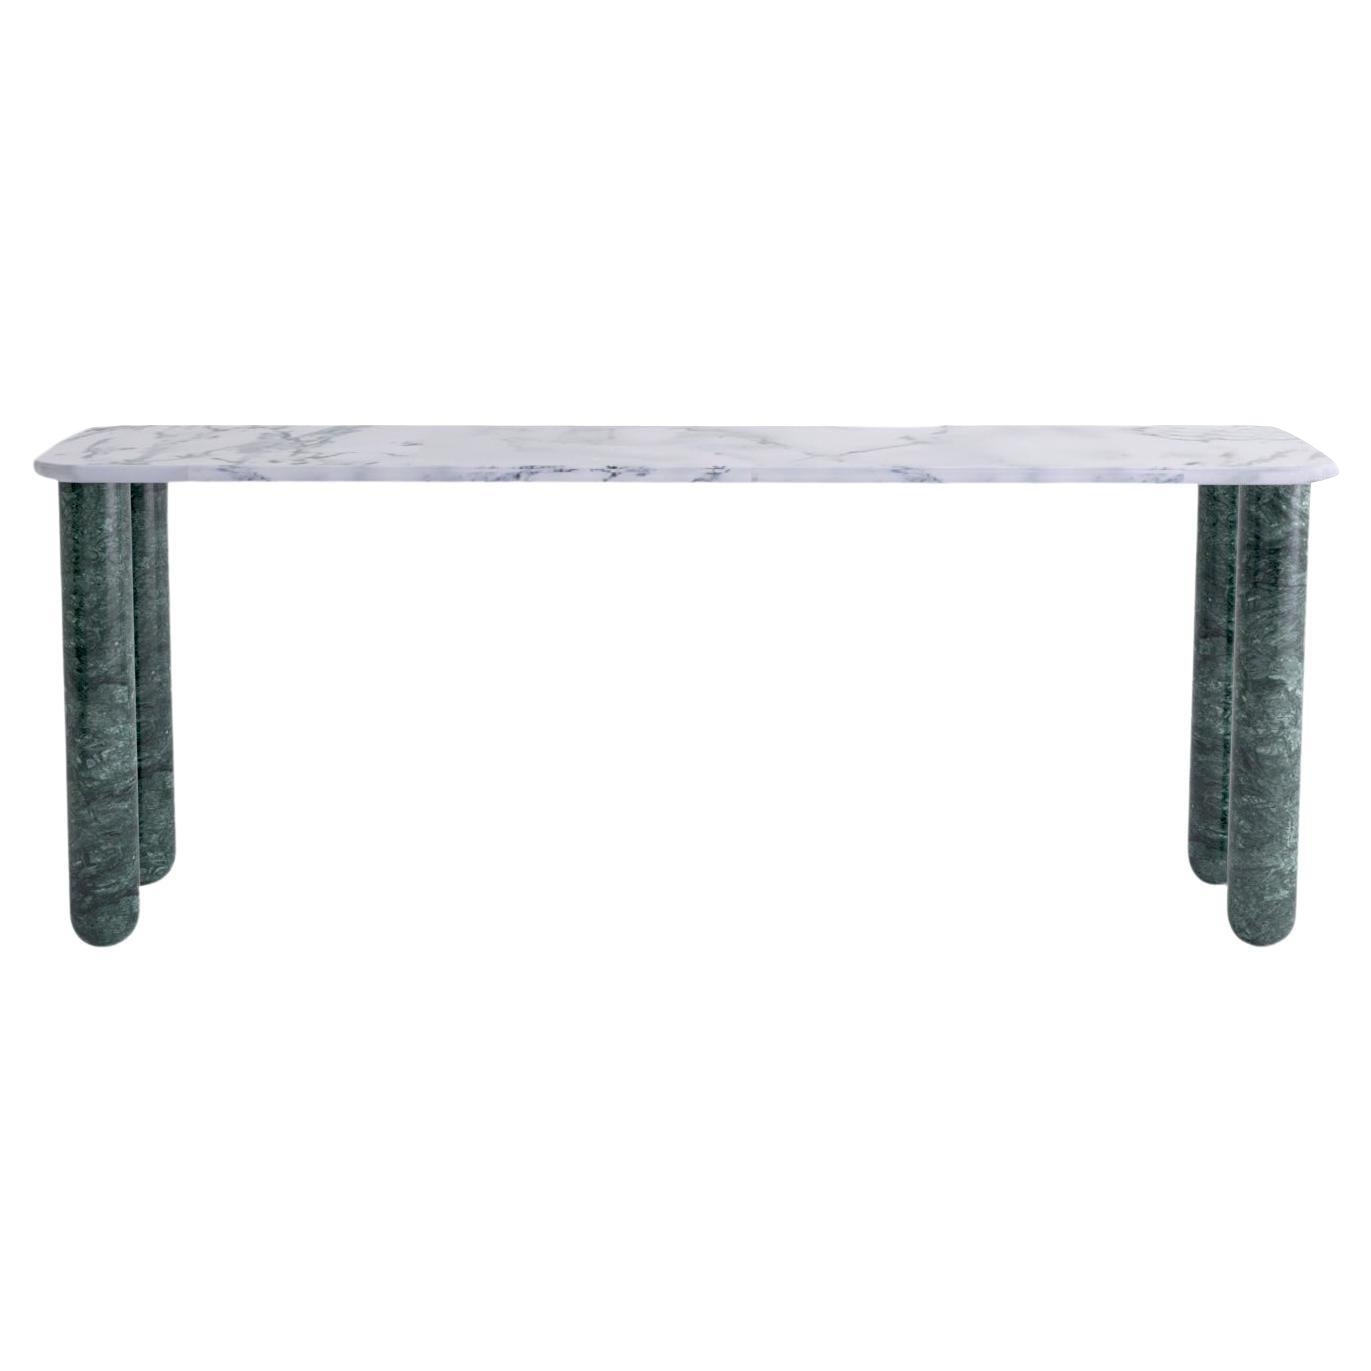 Large White and Green Marble "Sunday" Dining Table, Jean-Baptiste Souletie For Sale